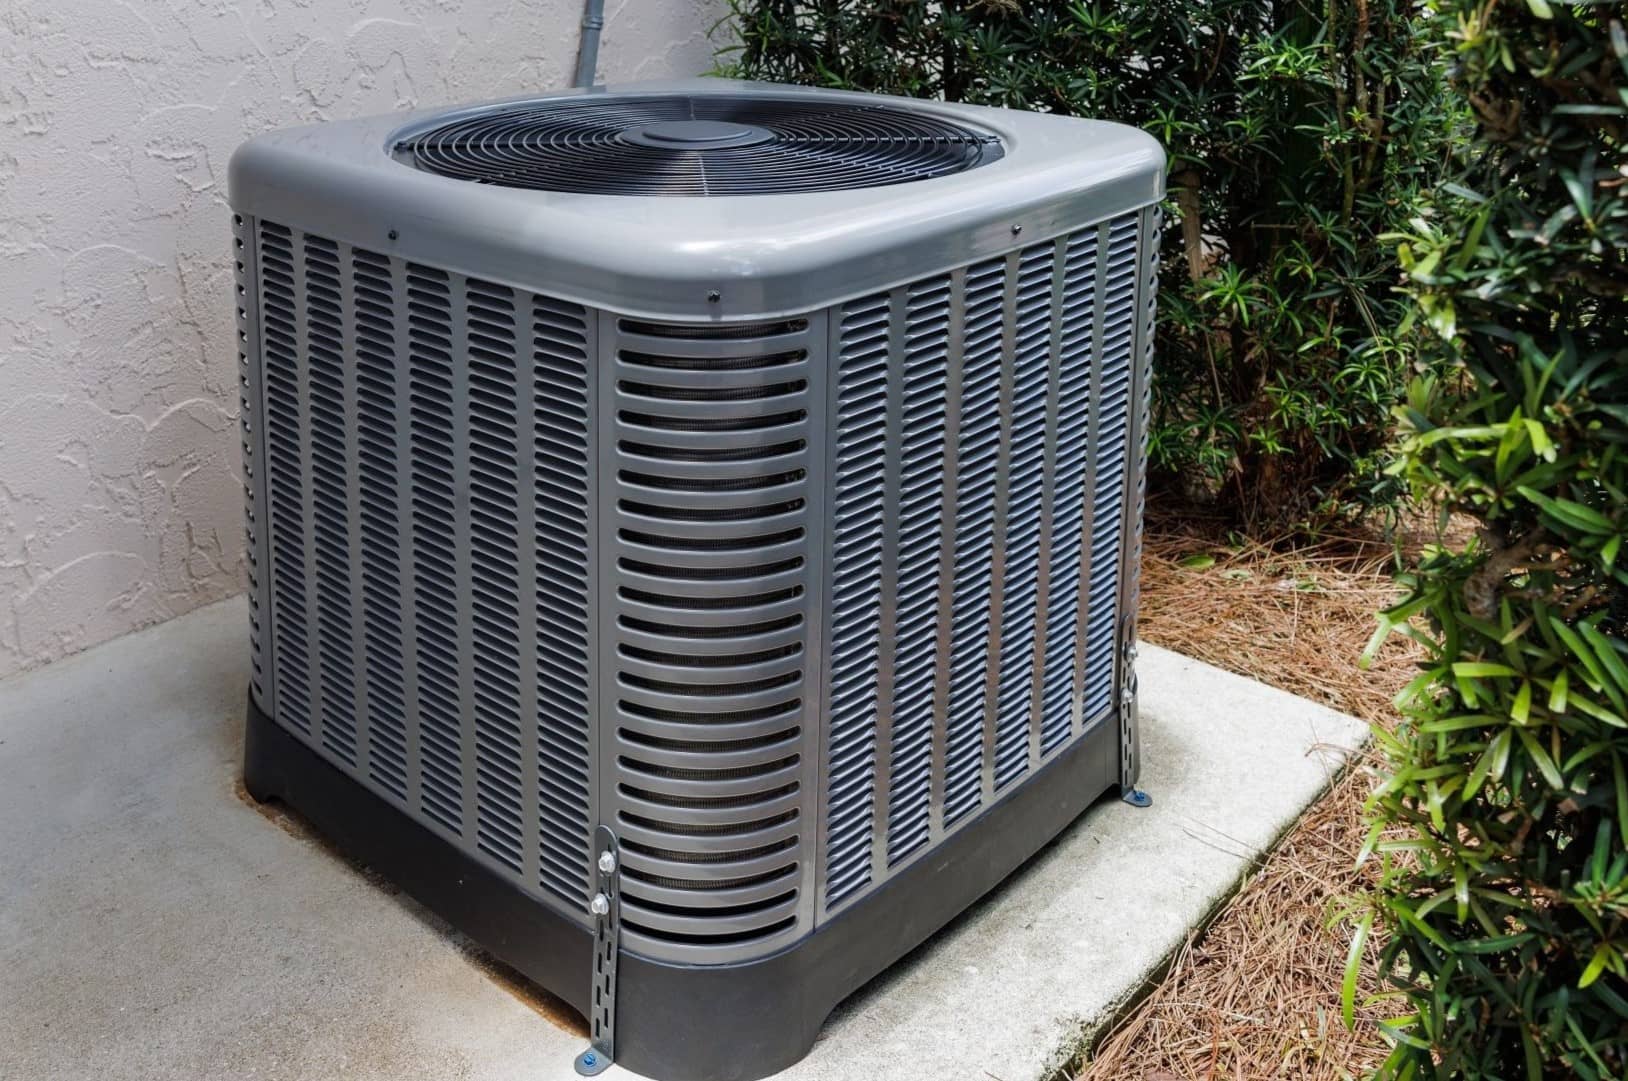 How Many Amps Does A 3-Ton Central Air Conditioner Use